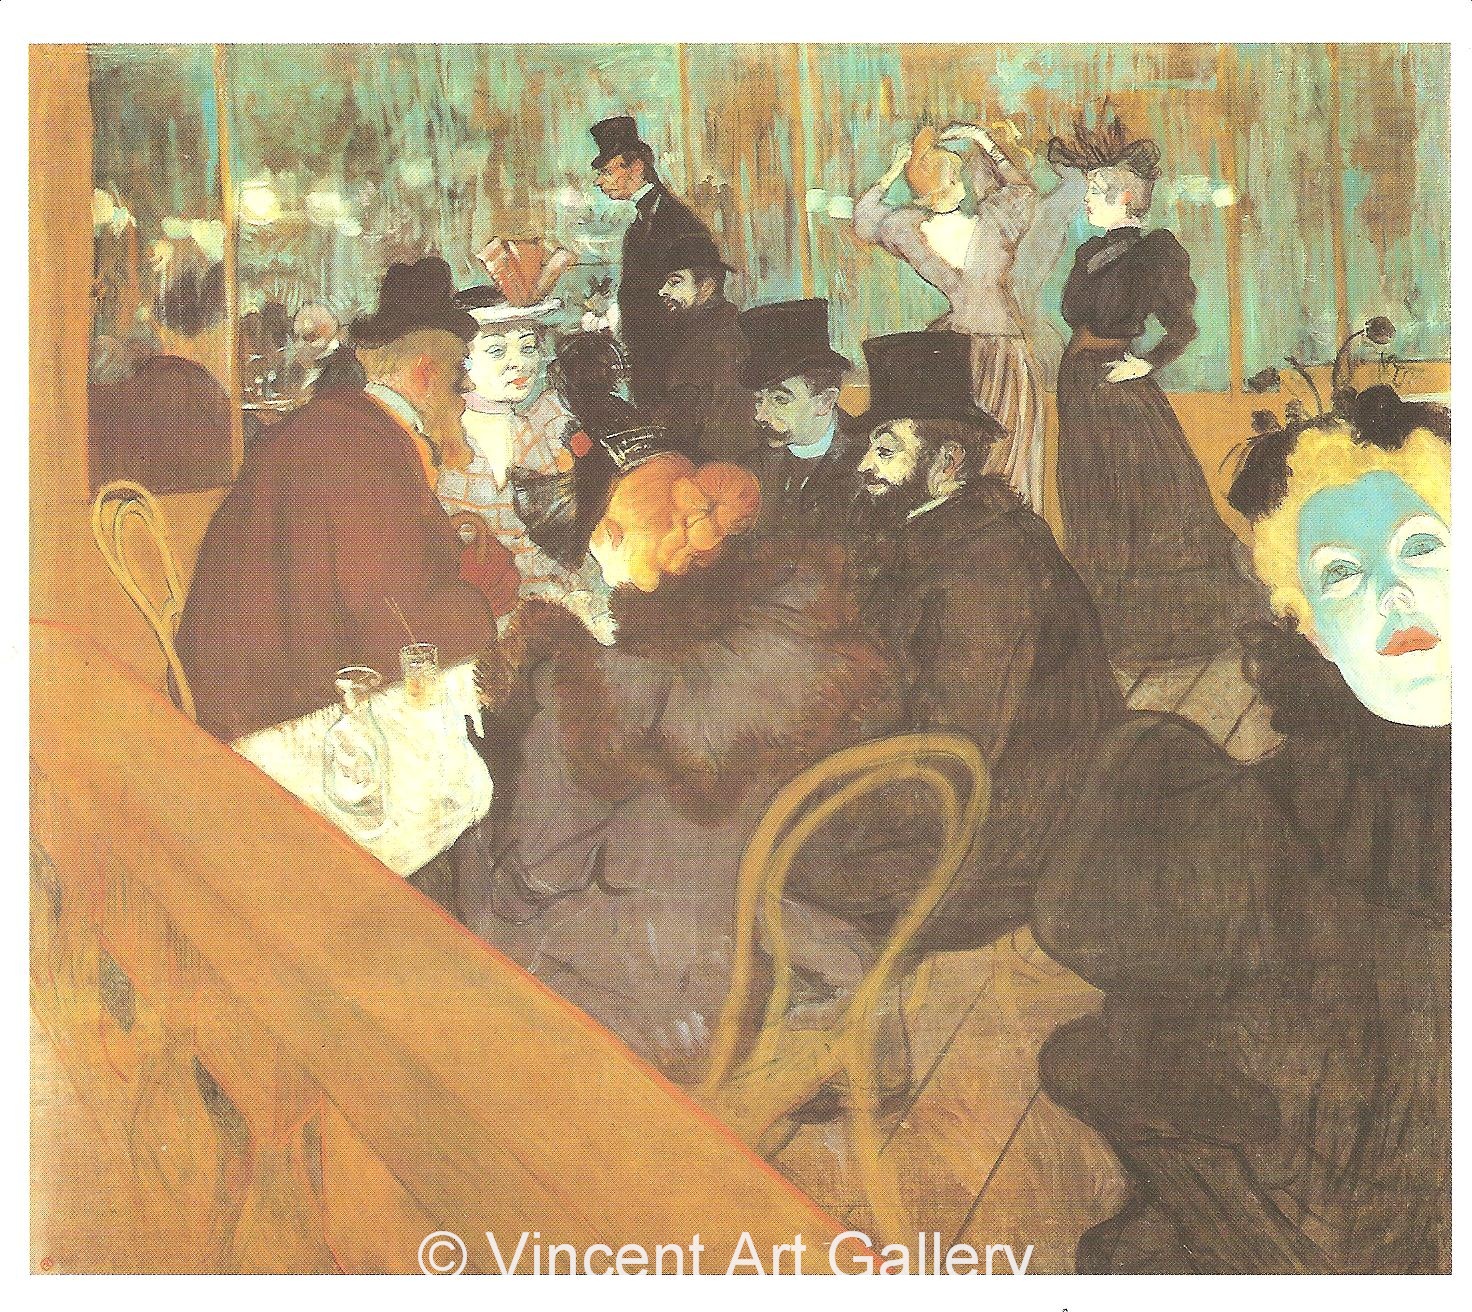 A456, TOULOUSE-LAUTREC, At the Moulin Rouge